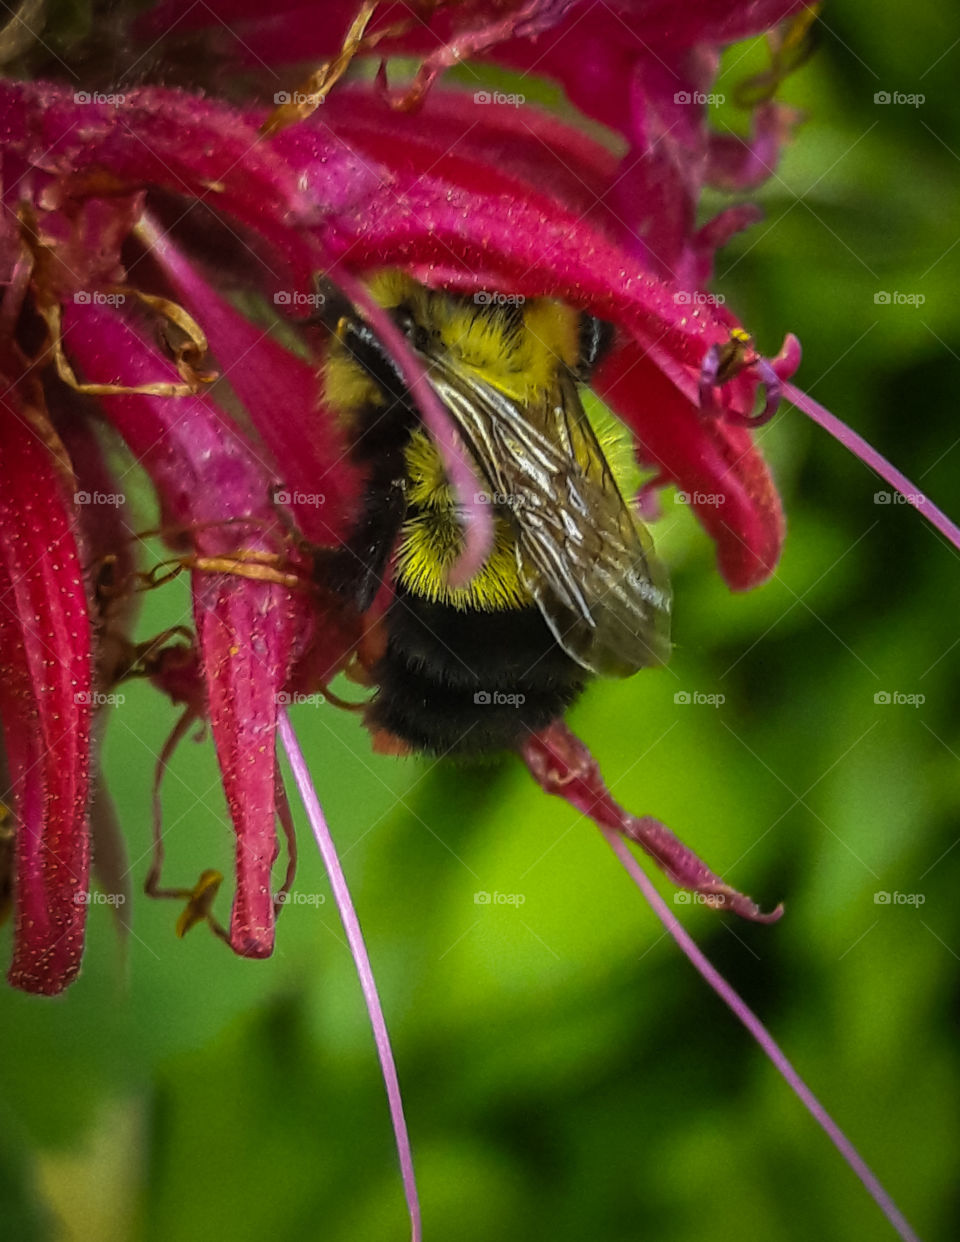 Fuzzy bumble bee, getting some nectar, from a bee balm flower.